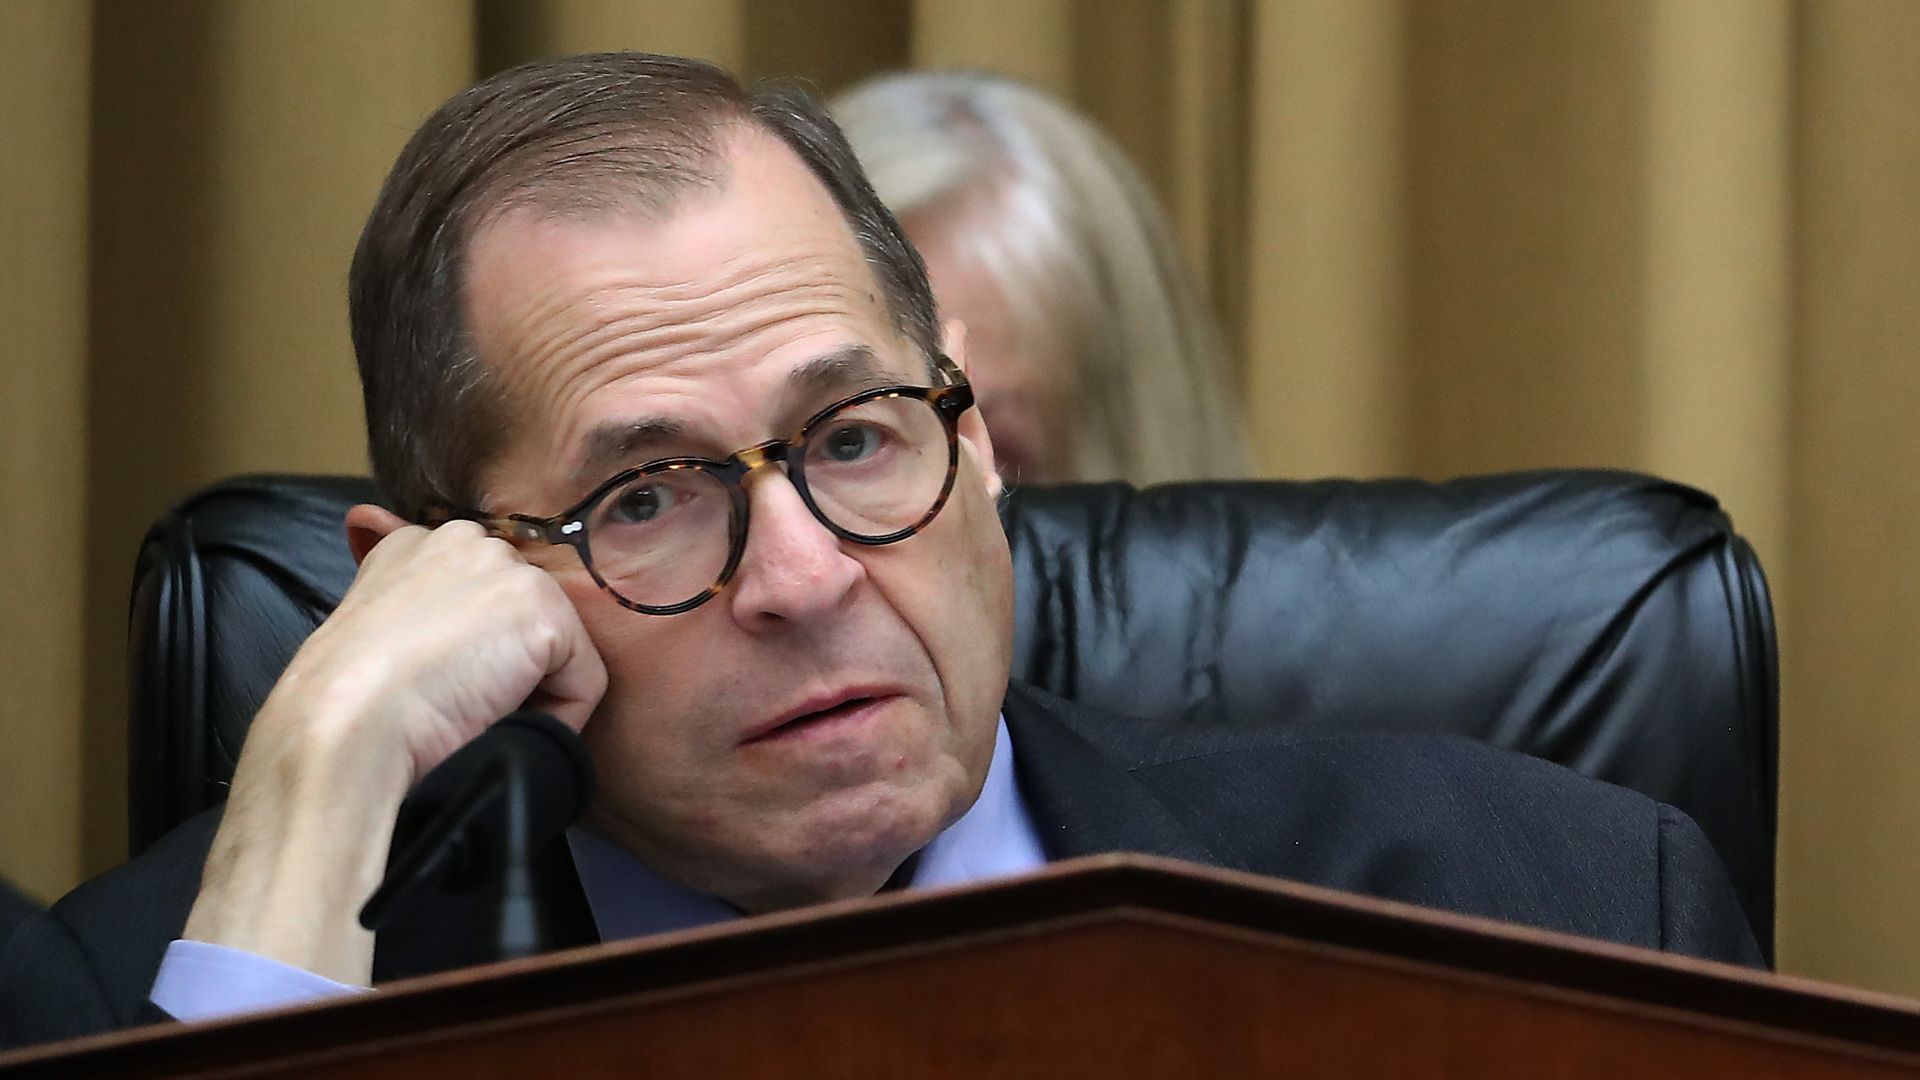 Chairman Jerry Nadler (D-NY) listens to comments during a House Judiciary Committee markup, on September 12, 2019 in Washington, DC.